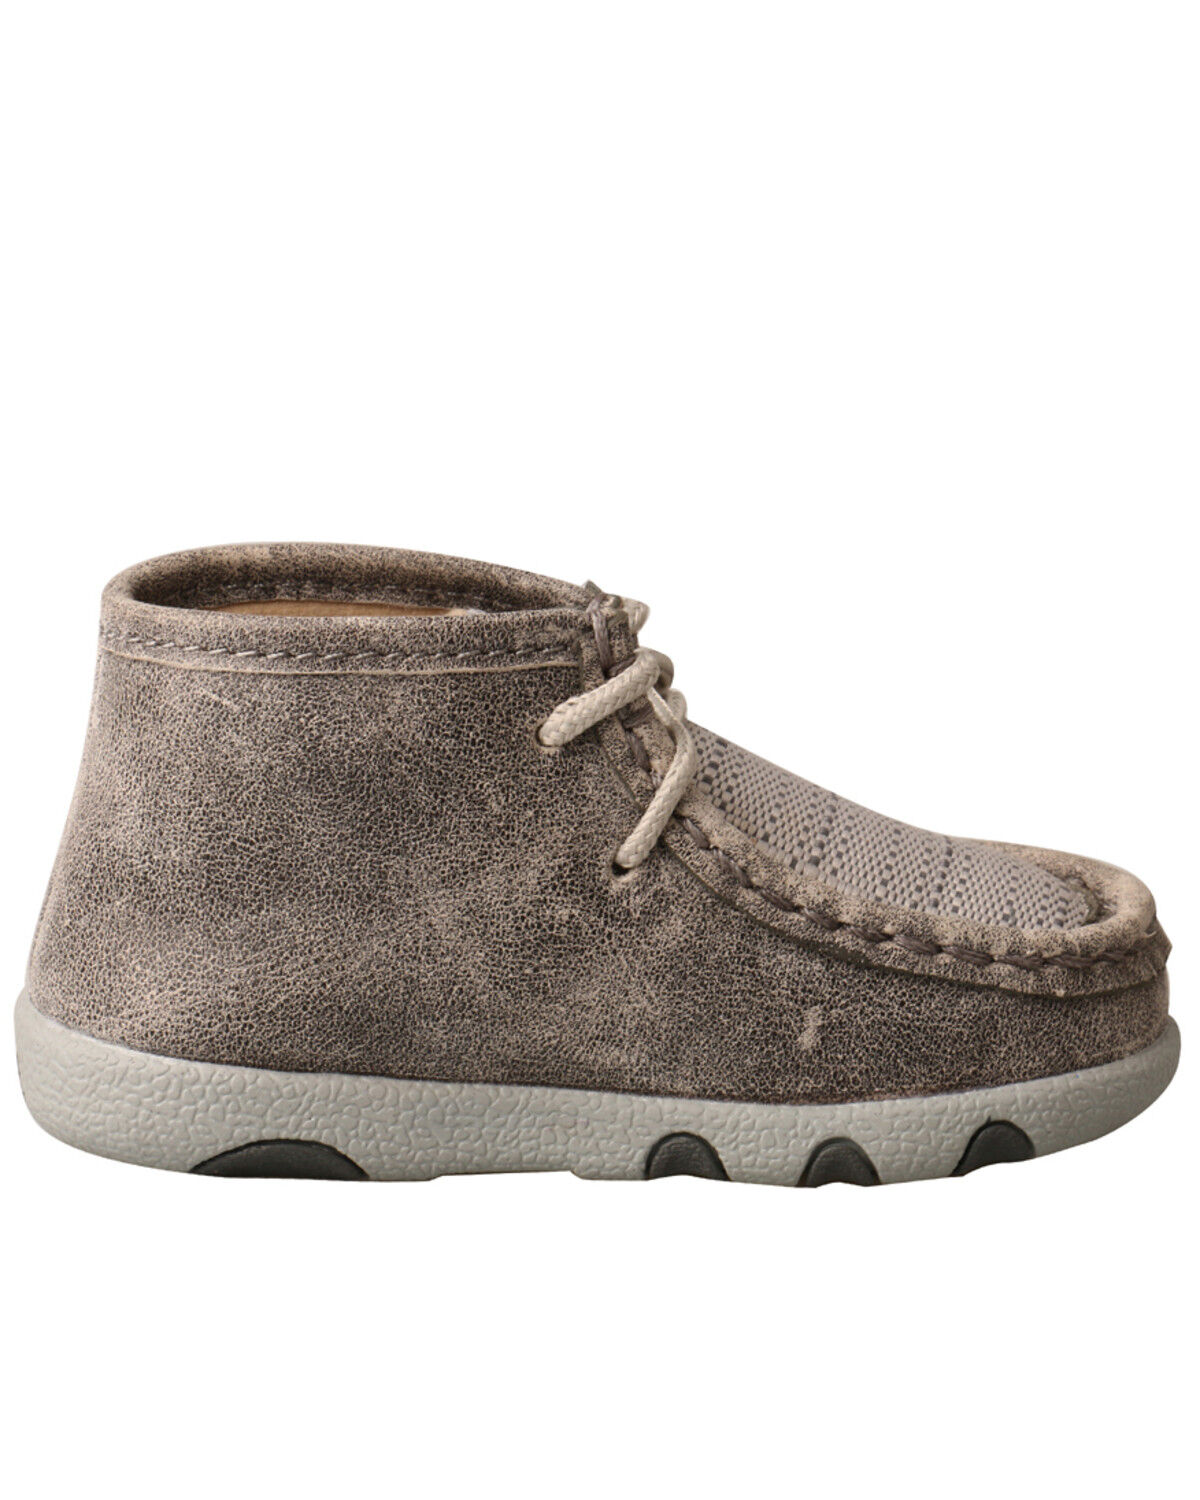 grey infant boots